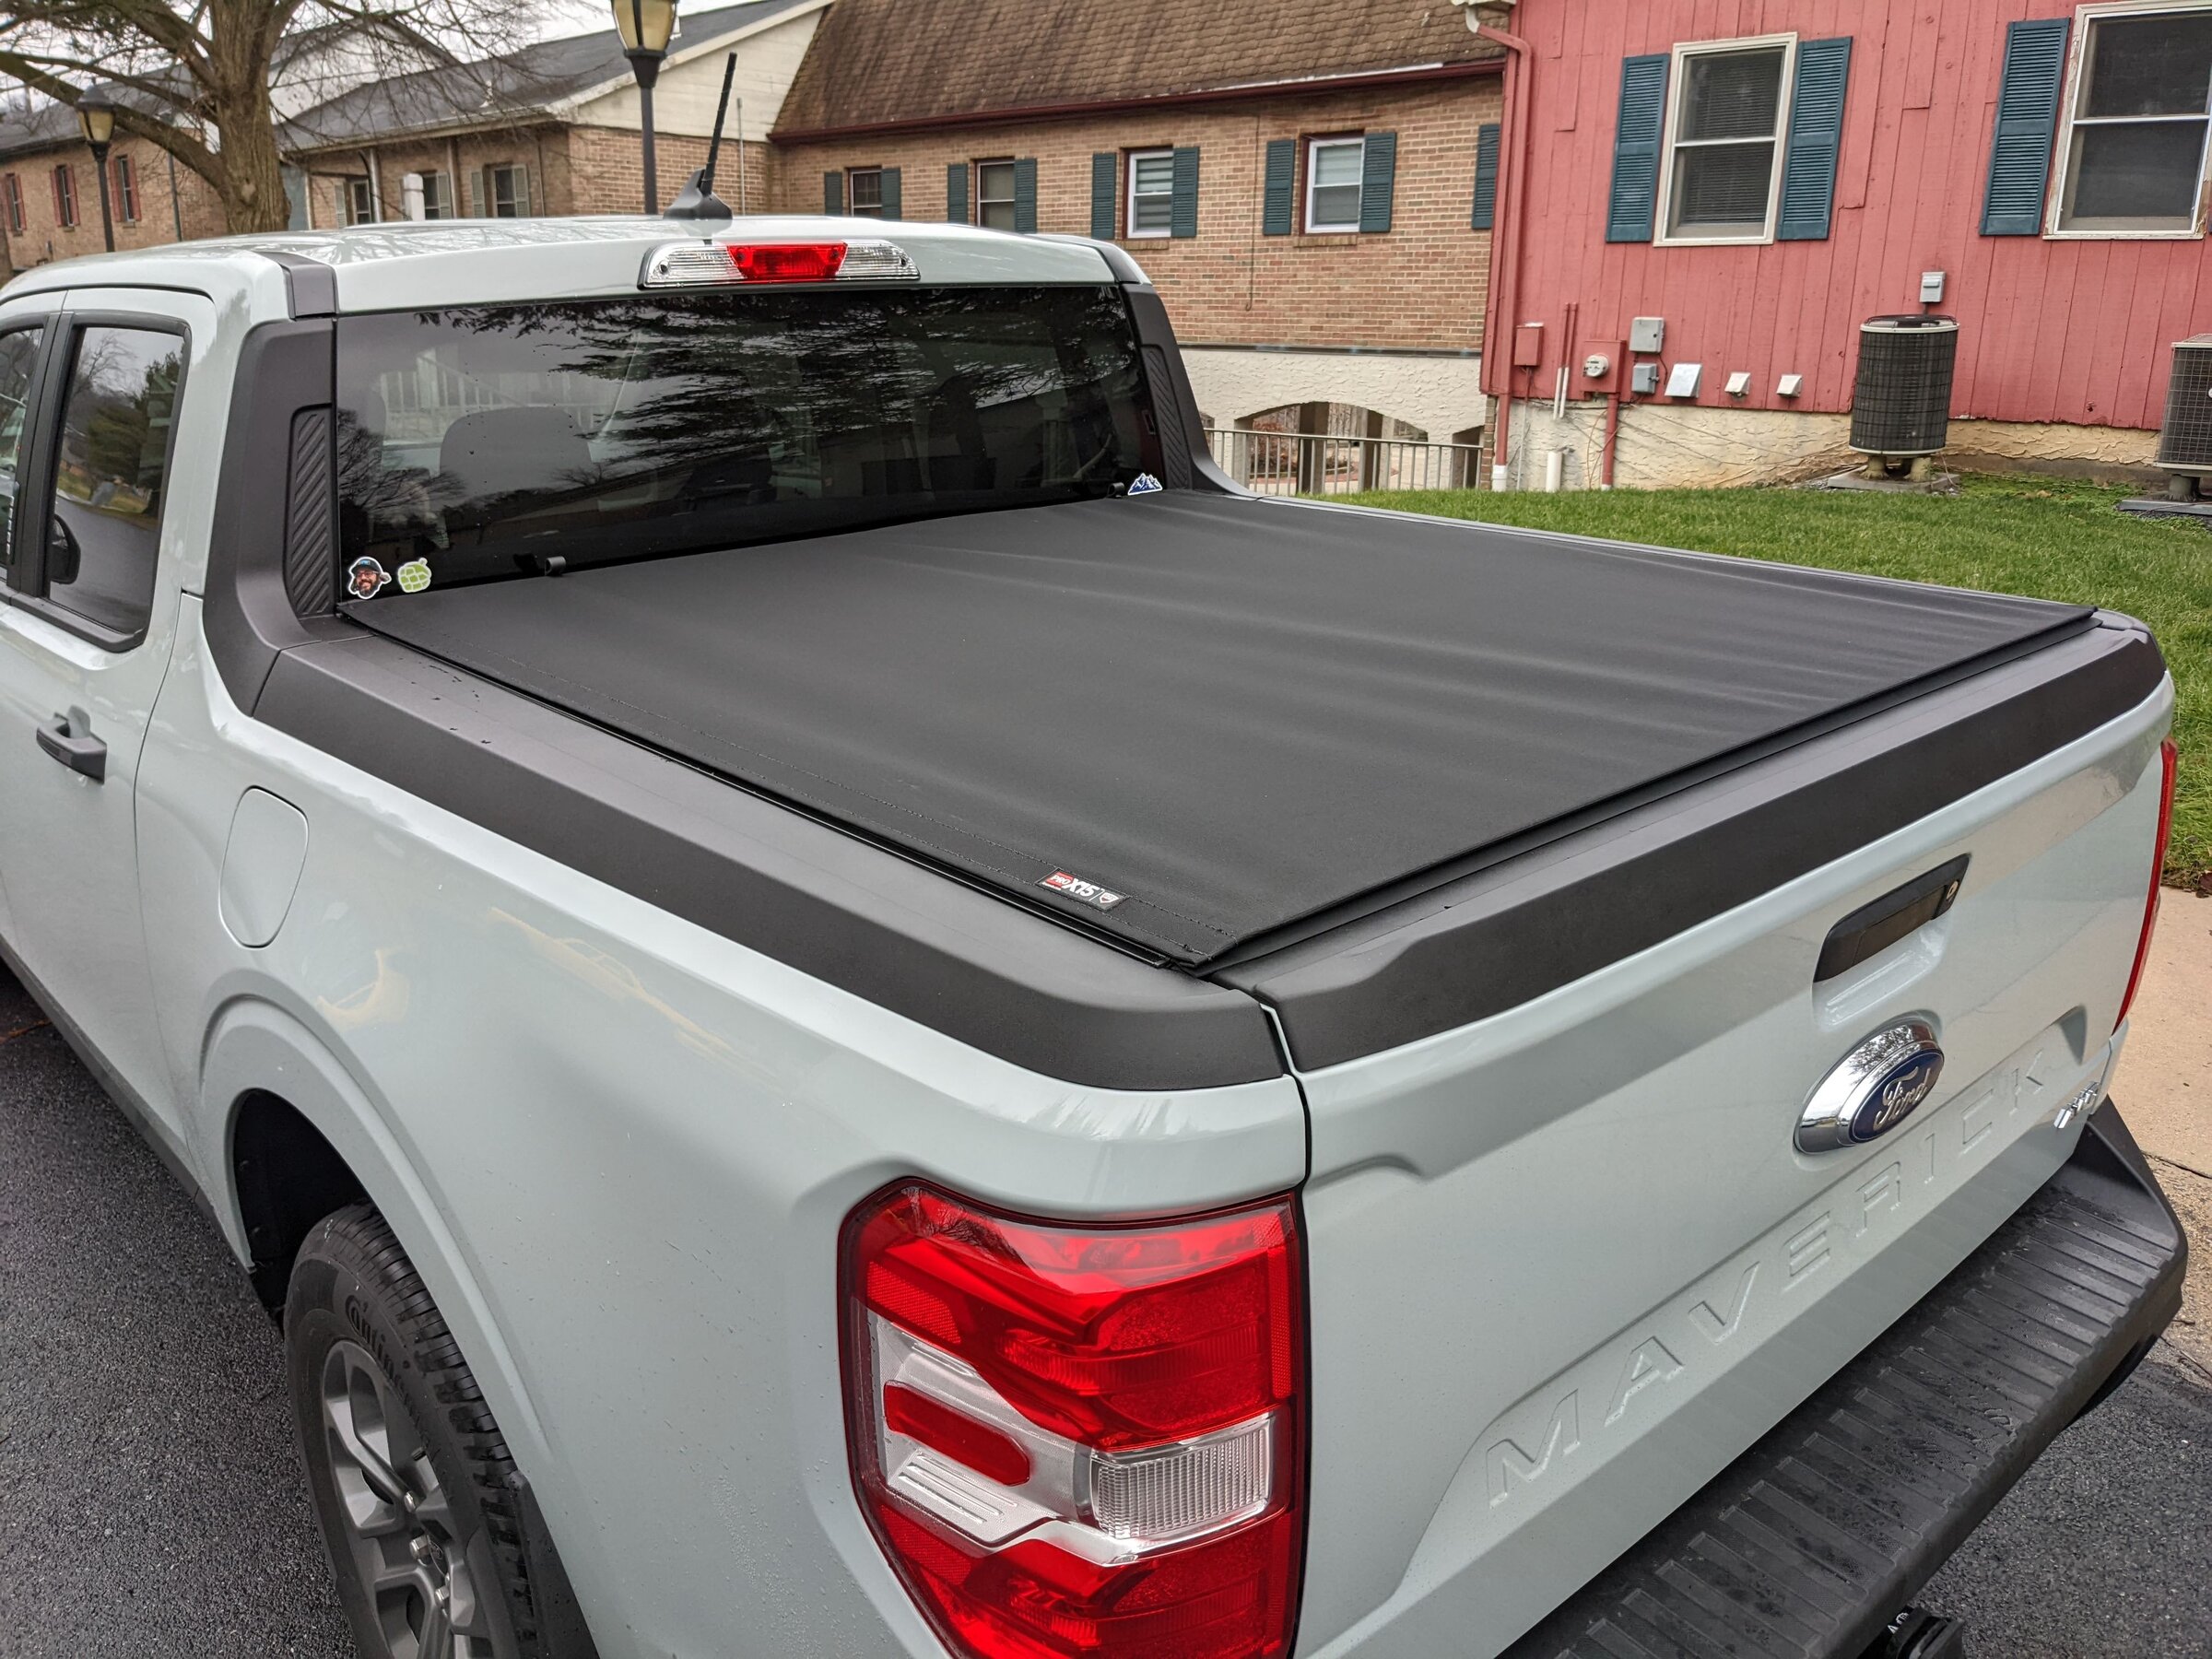 Ford Maverick Truxedo Pro X15 Tonneau Cover and LED Bed Lighting INSTALLED PXL_20211231_181802657